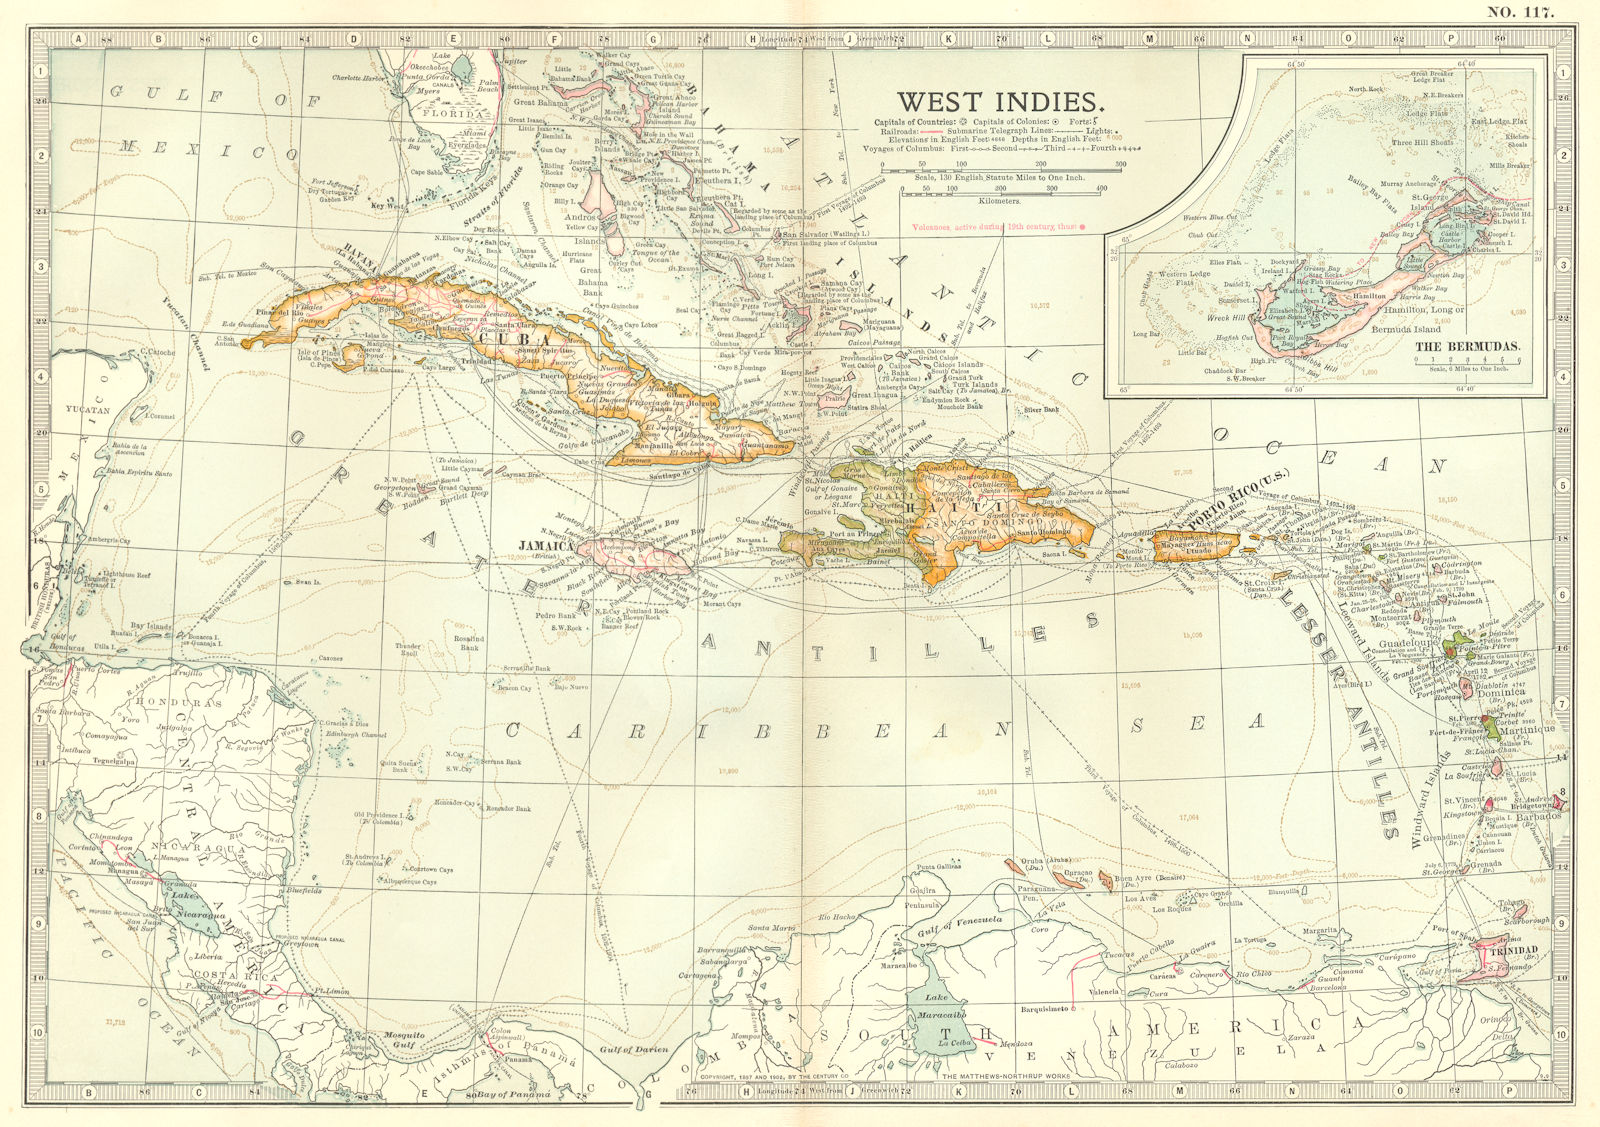 WEST INDIES. Shows voyages of Columbus & 1782 1779 1800 1809 Battles 1903 map